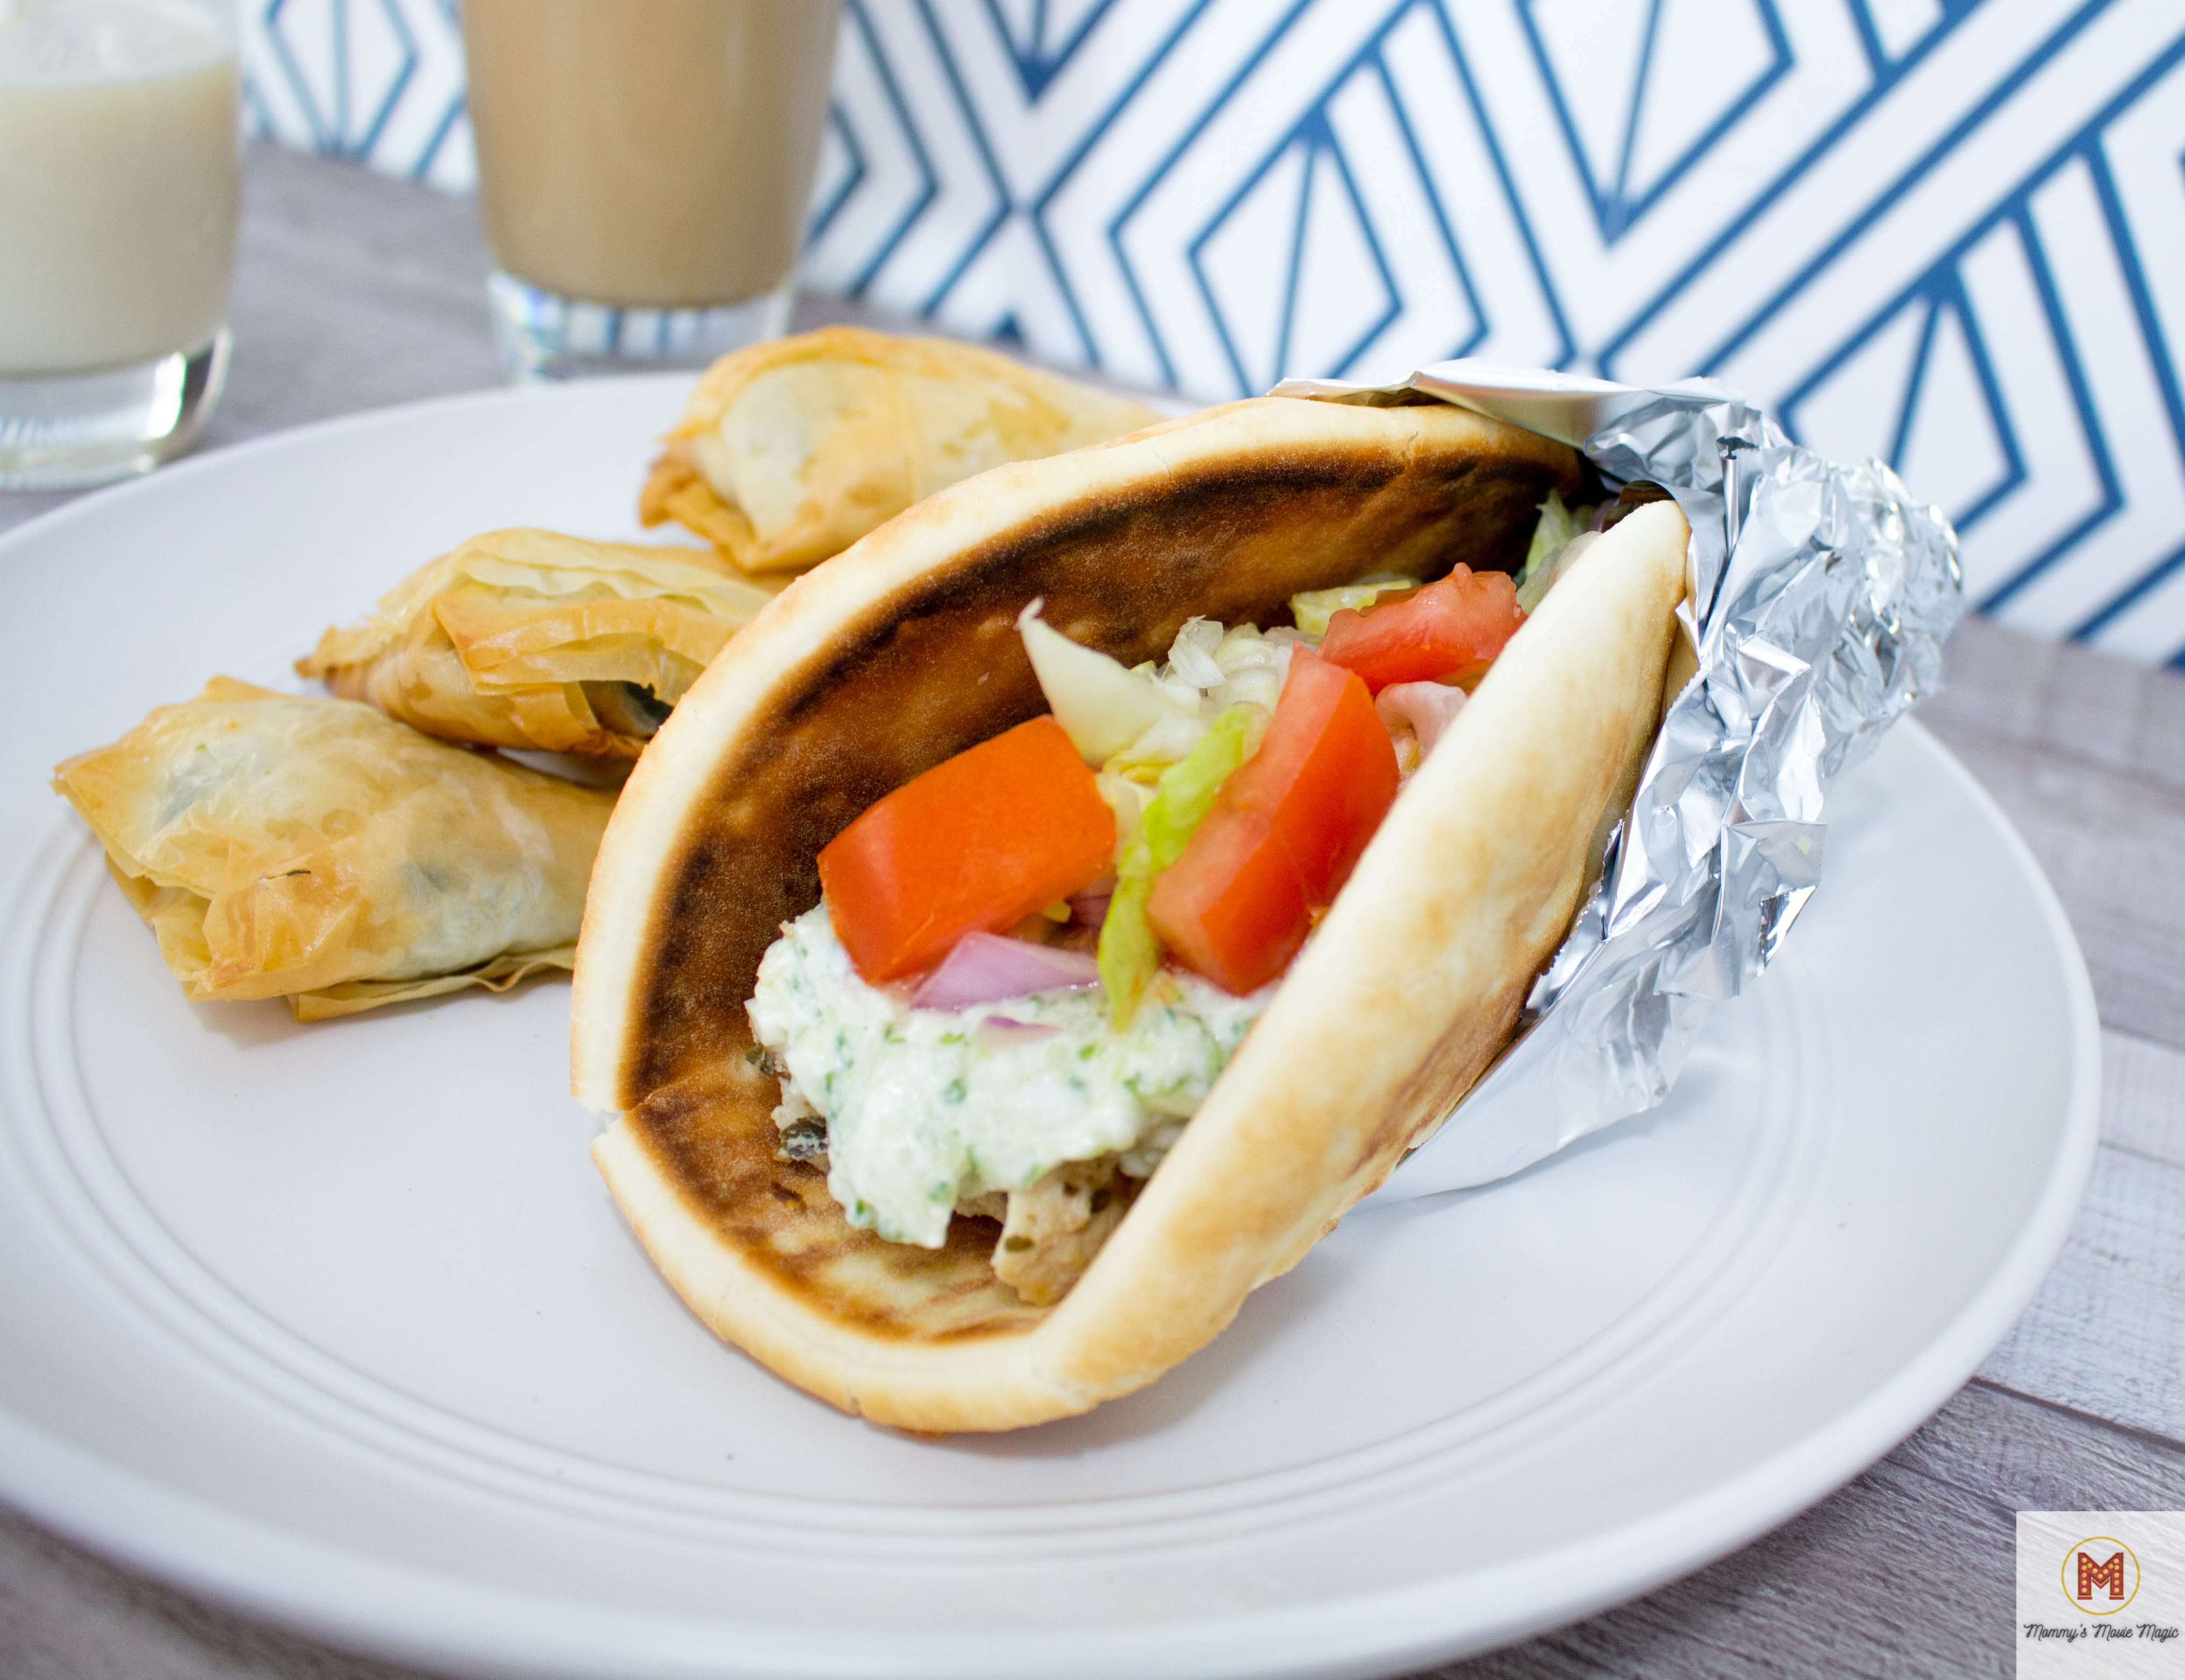 Hercules Movie Night for Family Movie night idea with Hercules Party food - Chicken Gyro Recipe